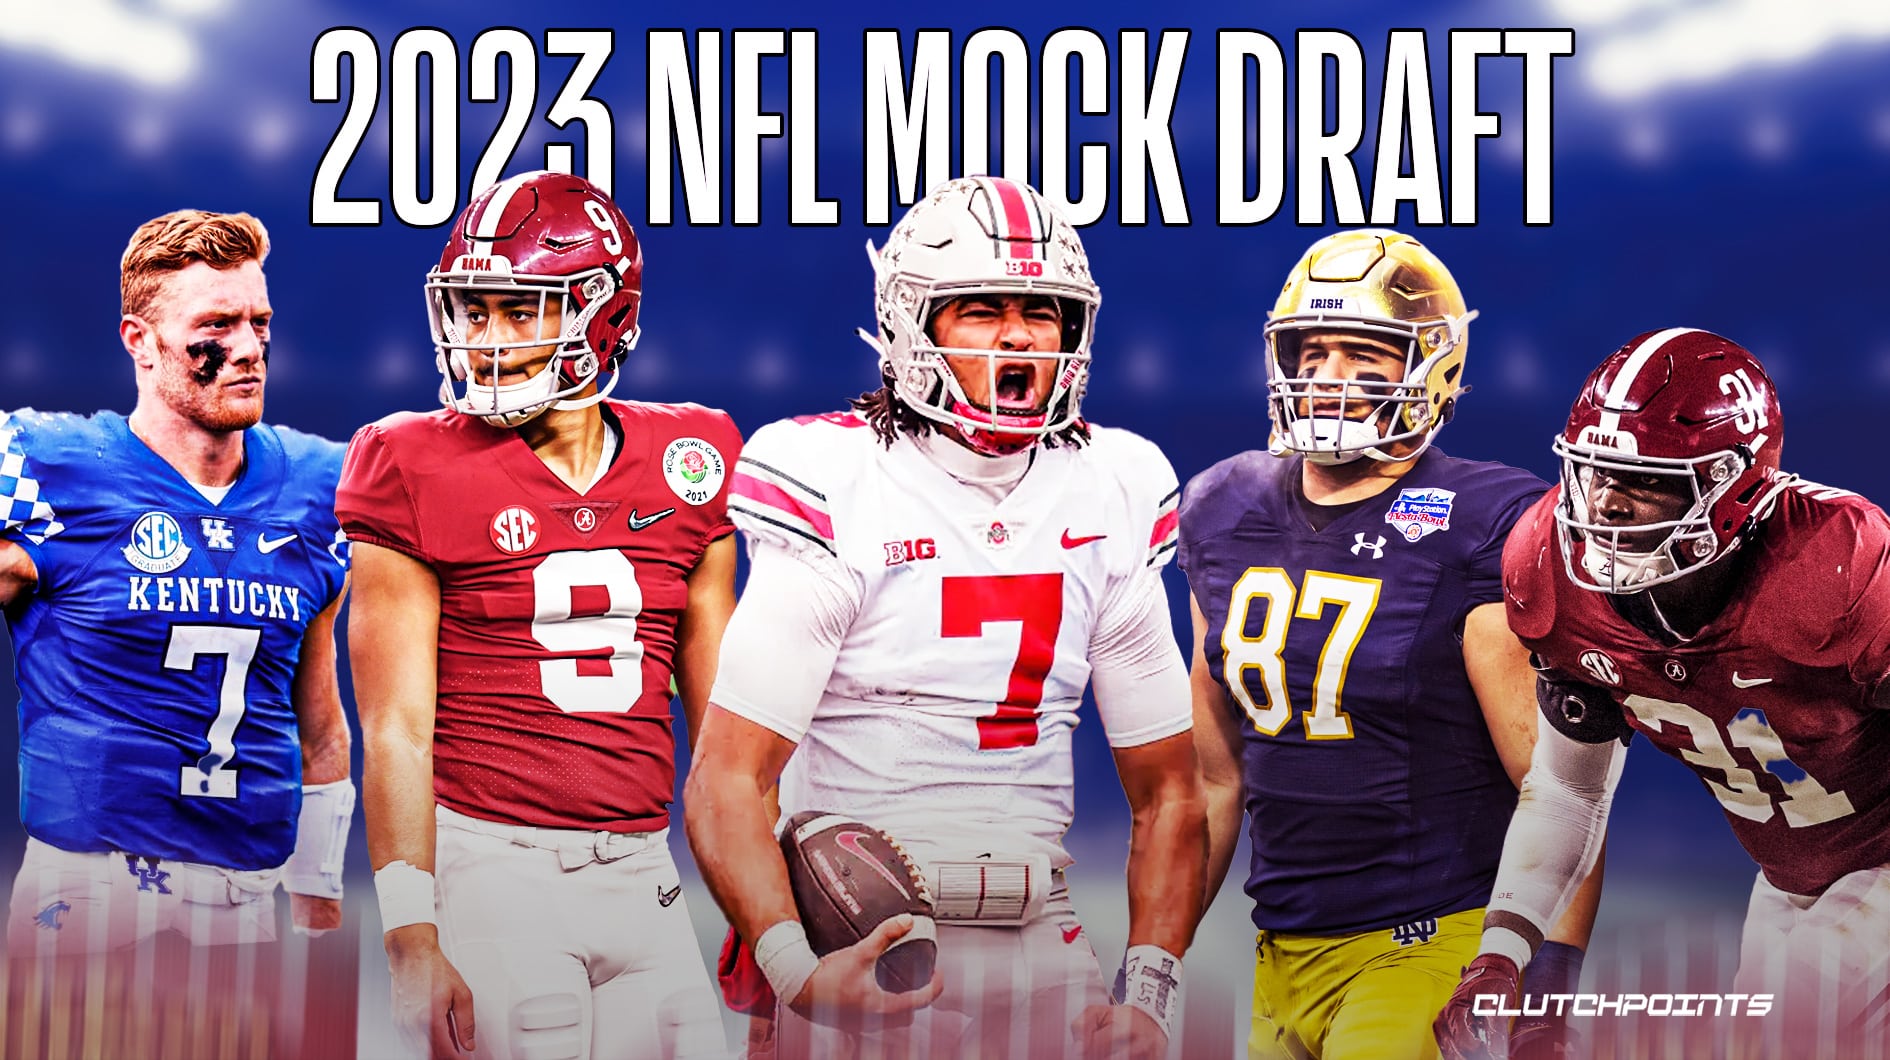 2023 Mock Draft: Seahawks move to No. 1 for best player in 2023 class